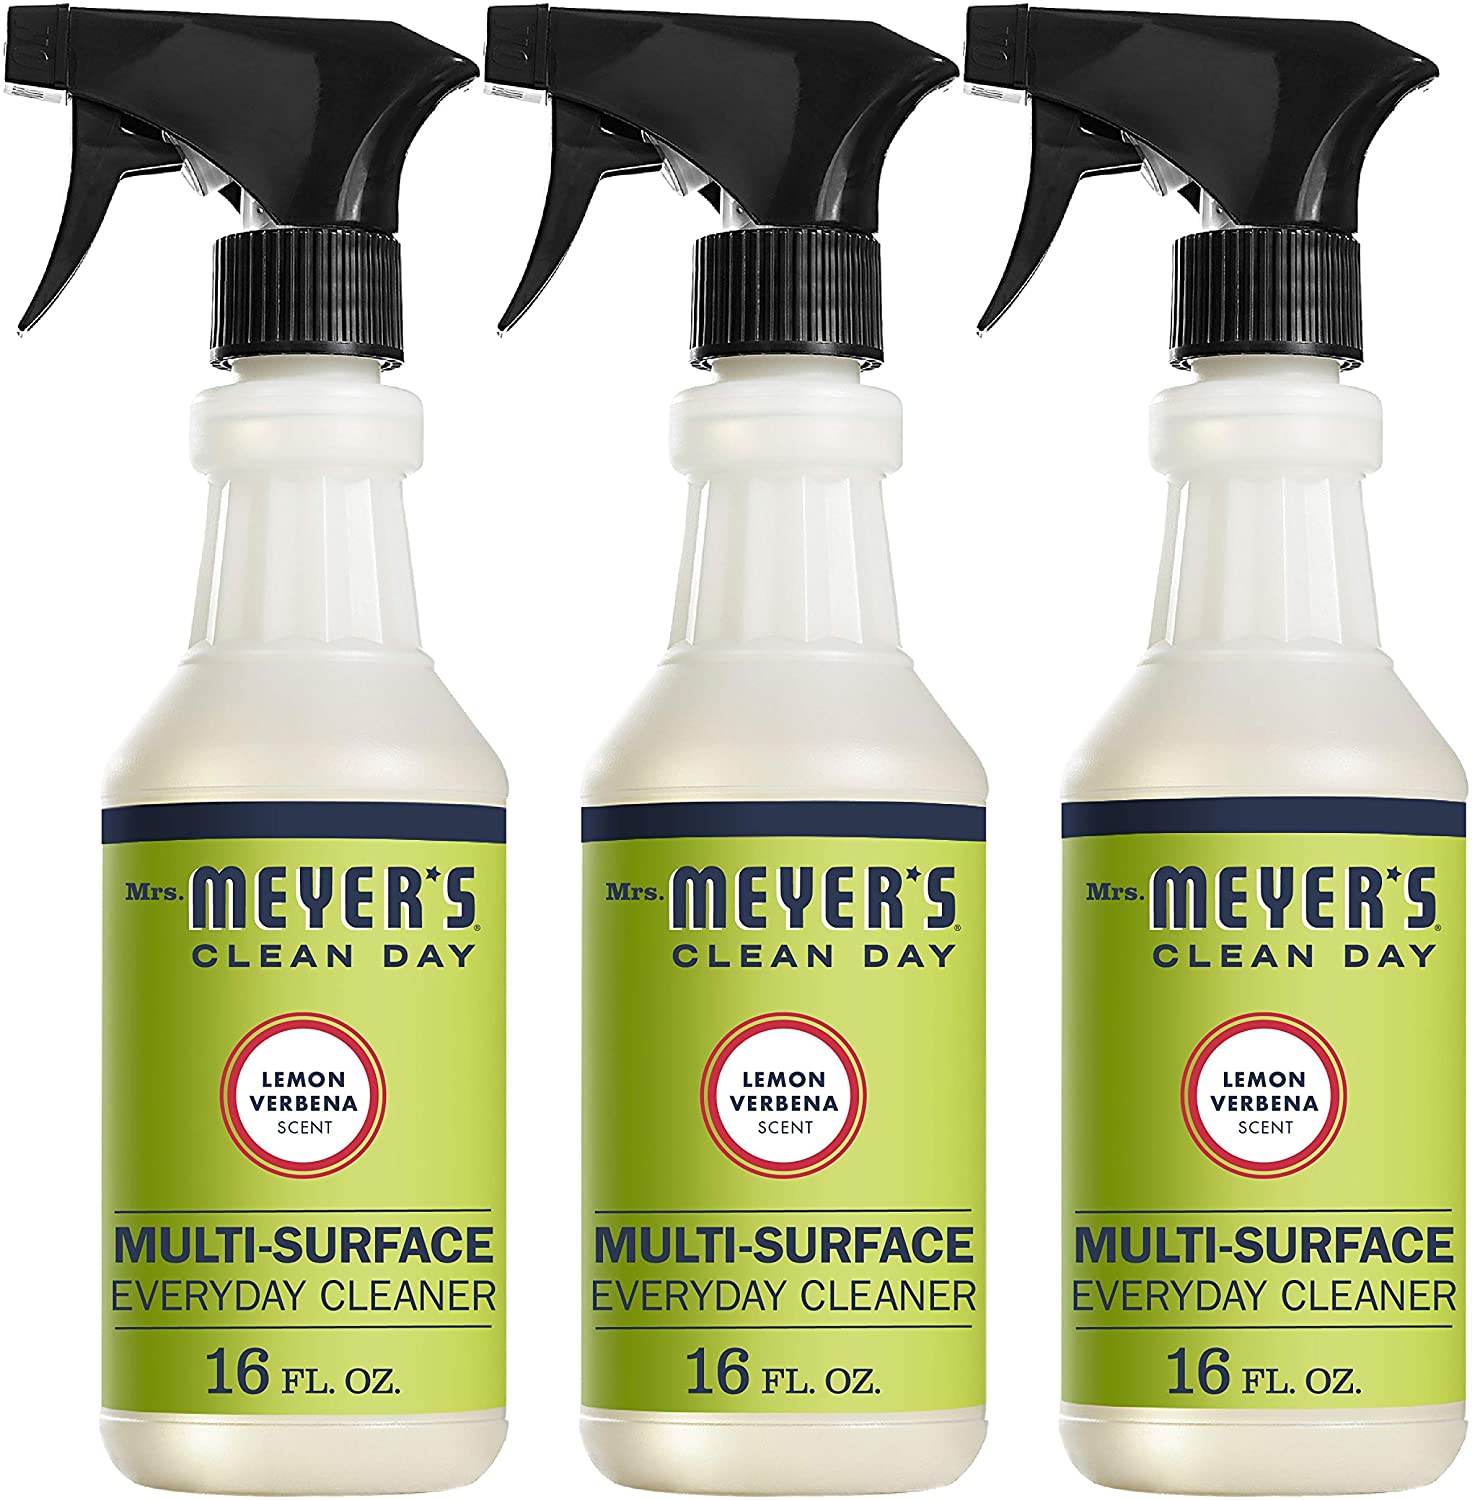 Mrs. Meyer’s Clean Day Multi-Surface Cleaner Spray 3pk $7 shipped